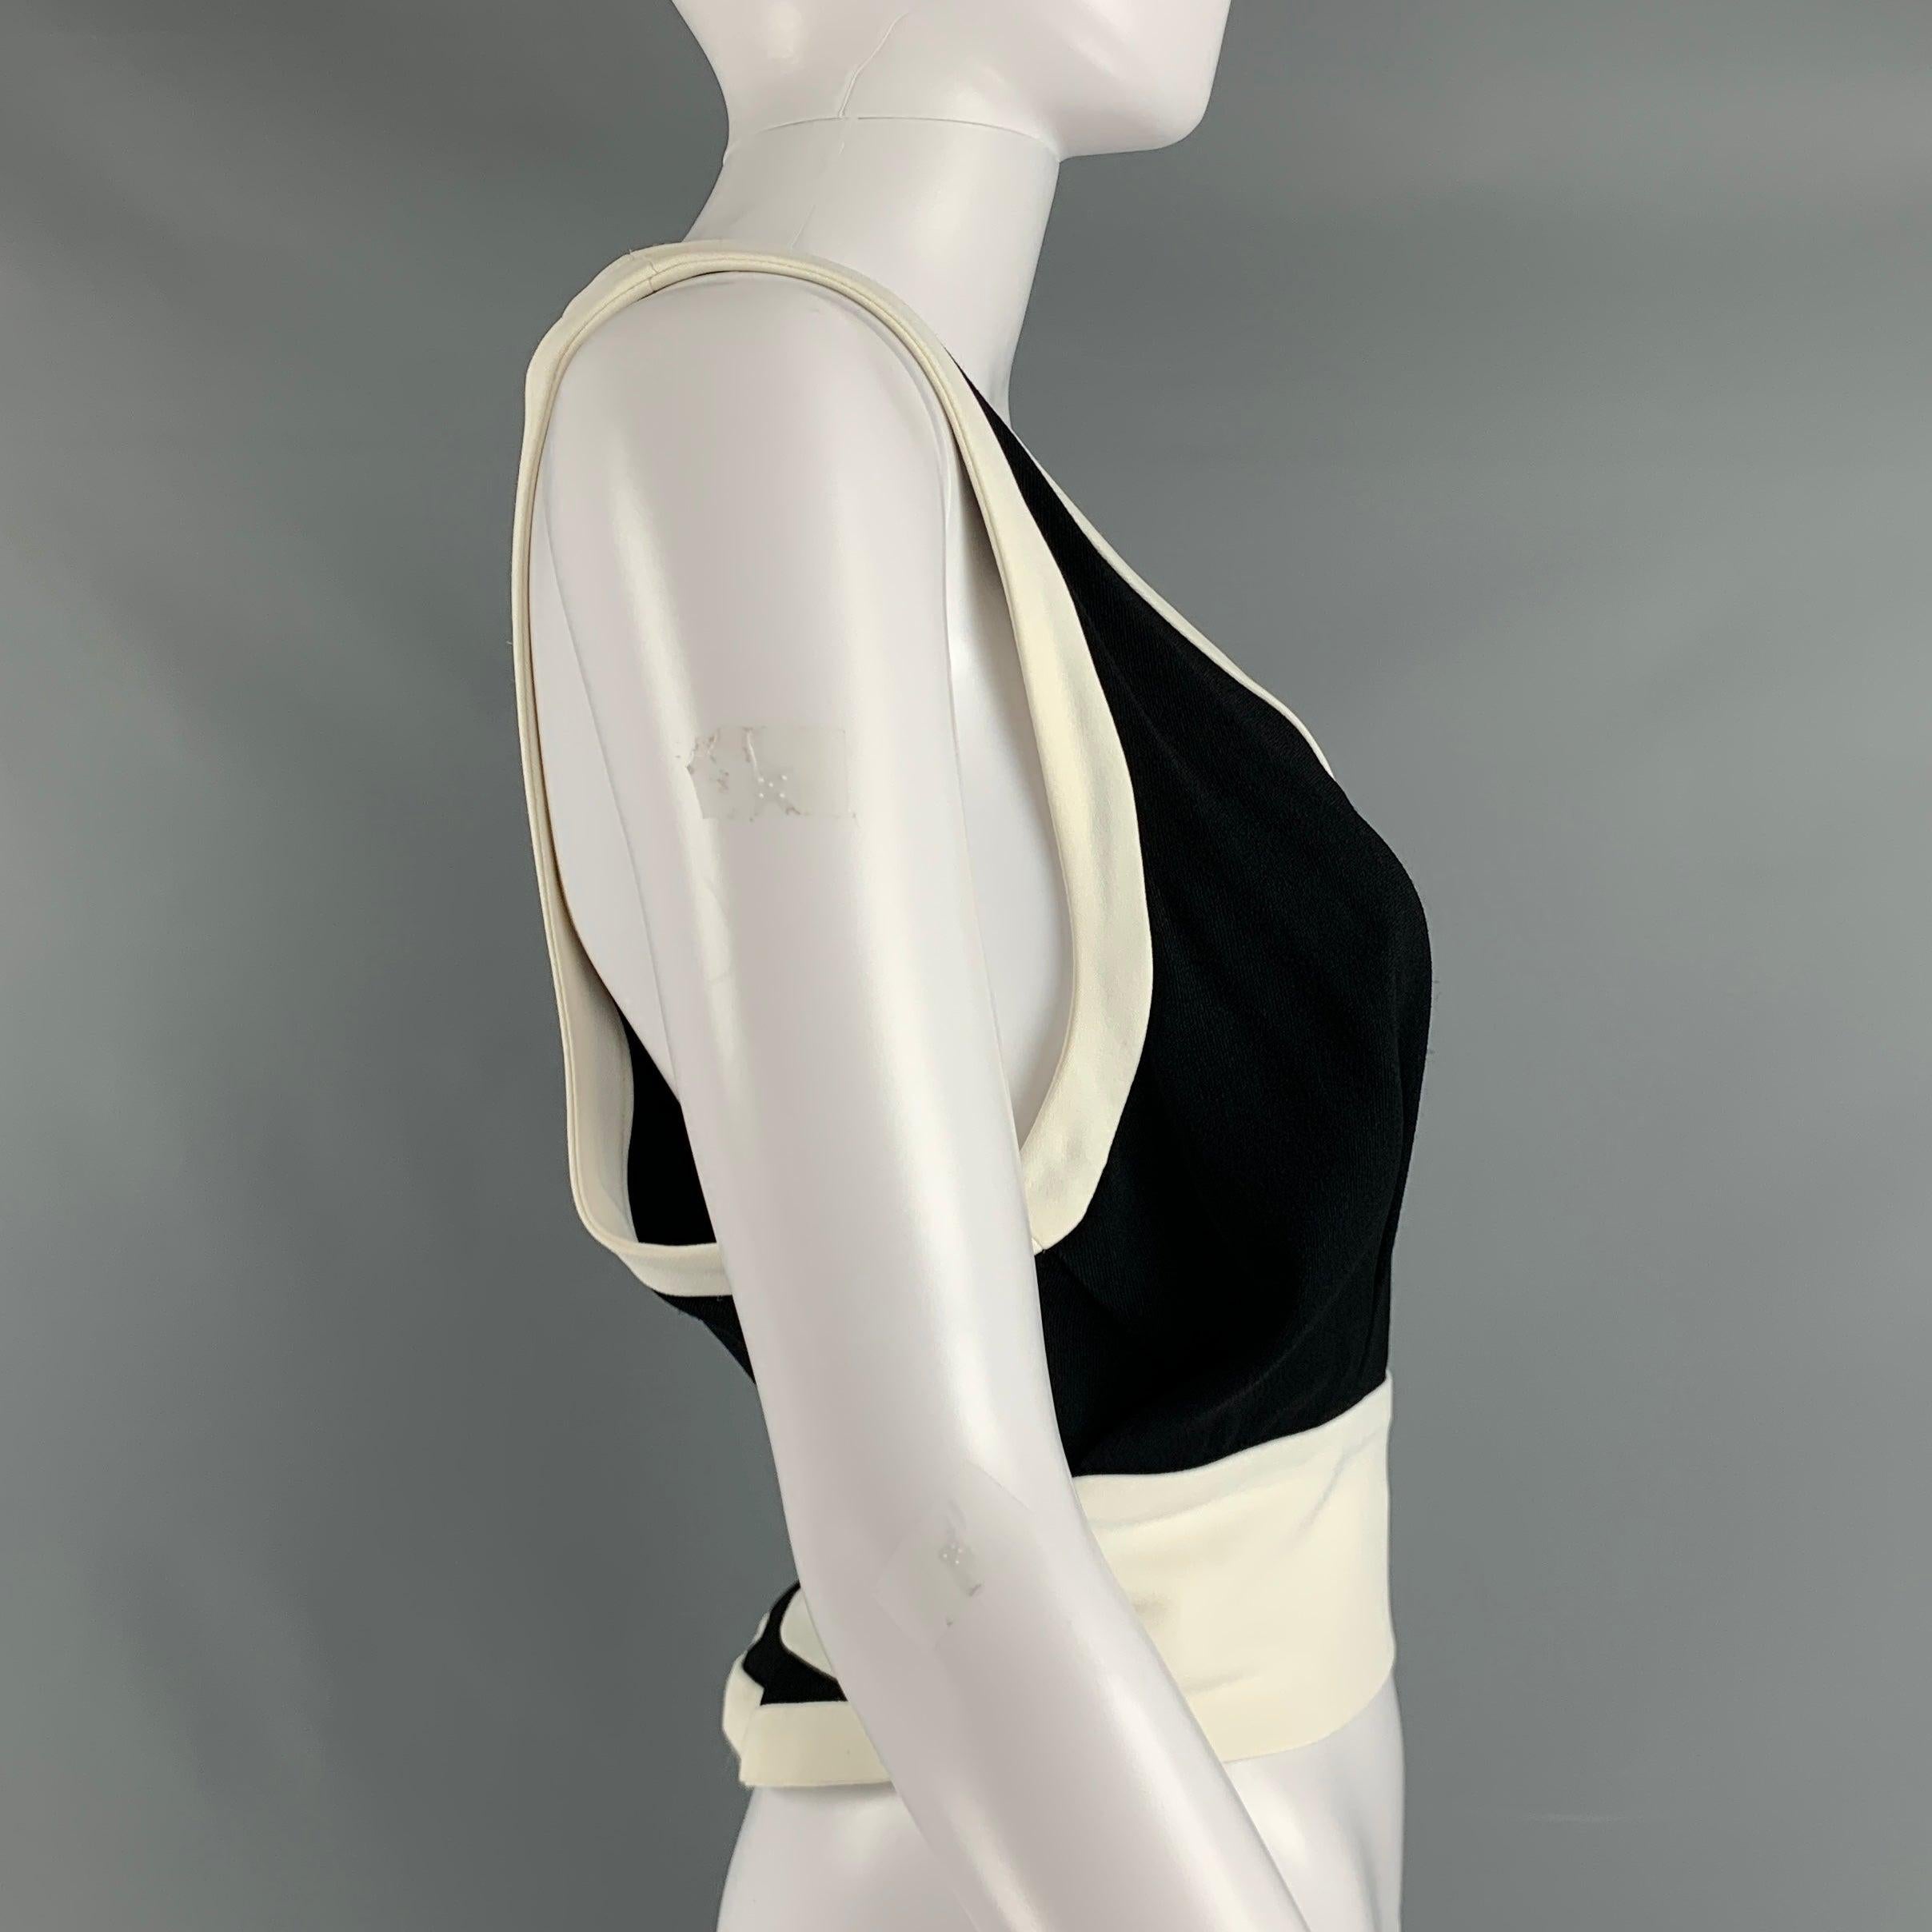 MIU MIU casual top comes in a black and cream viscose knit featuring a contrasting trim, wrap sash, and a v-neck. Made in Italy.Very Good Pre-Owned Condition. Minor sport mark. 

Marked:   2 

Measurements: 
  Bust: 32 inches Length: 20 inches 
  
 